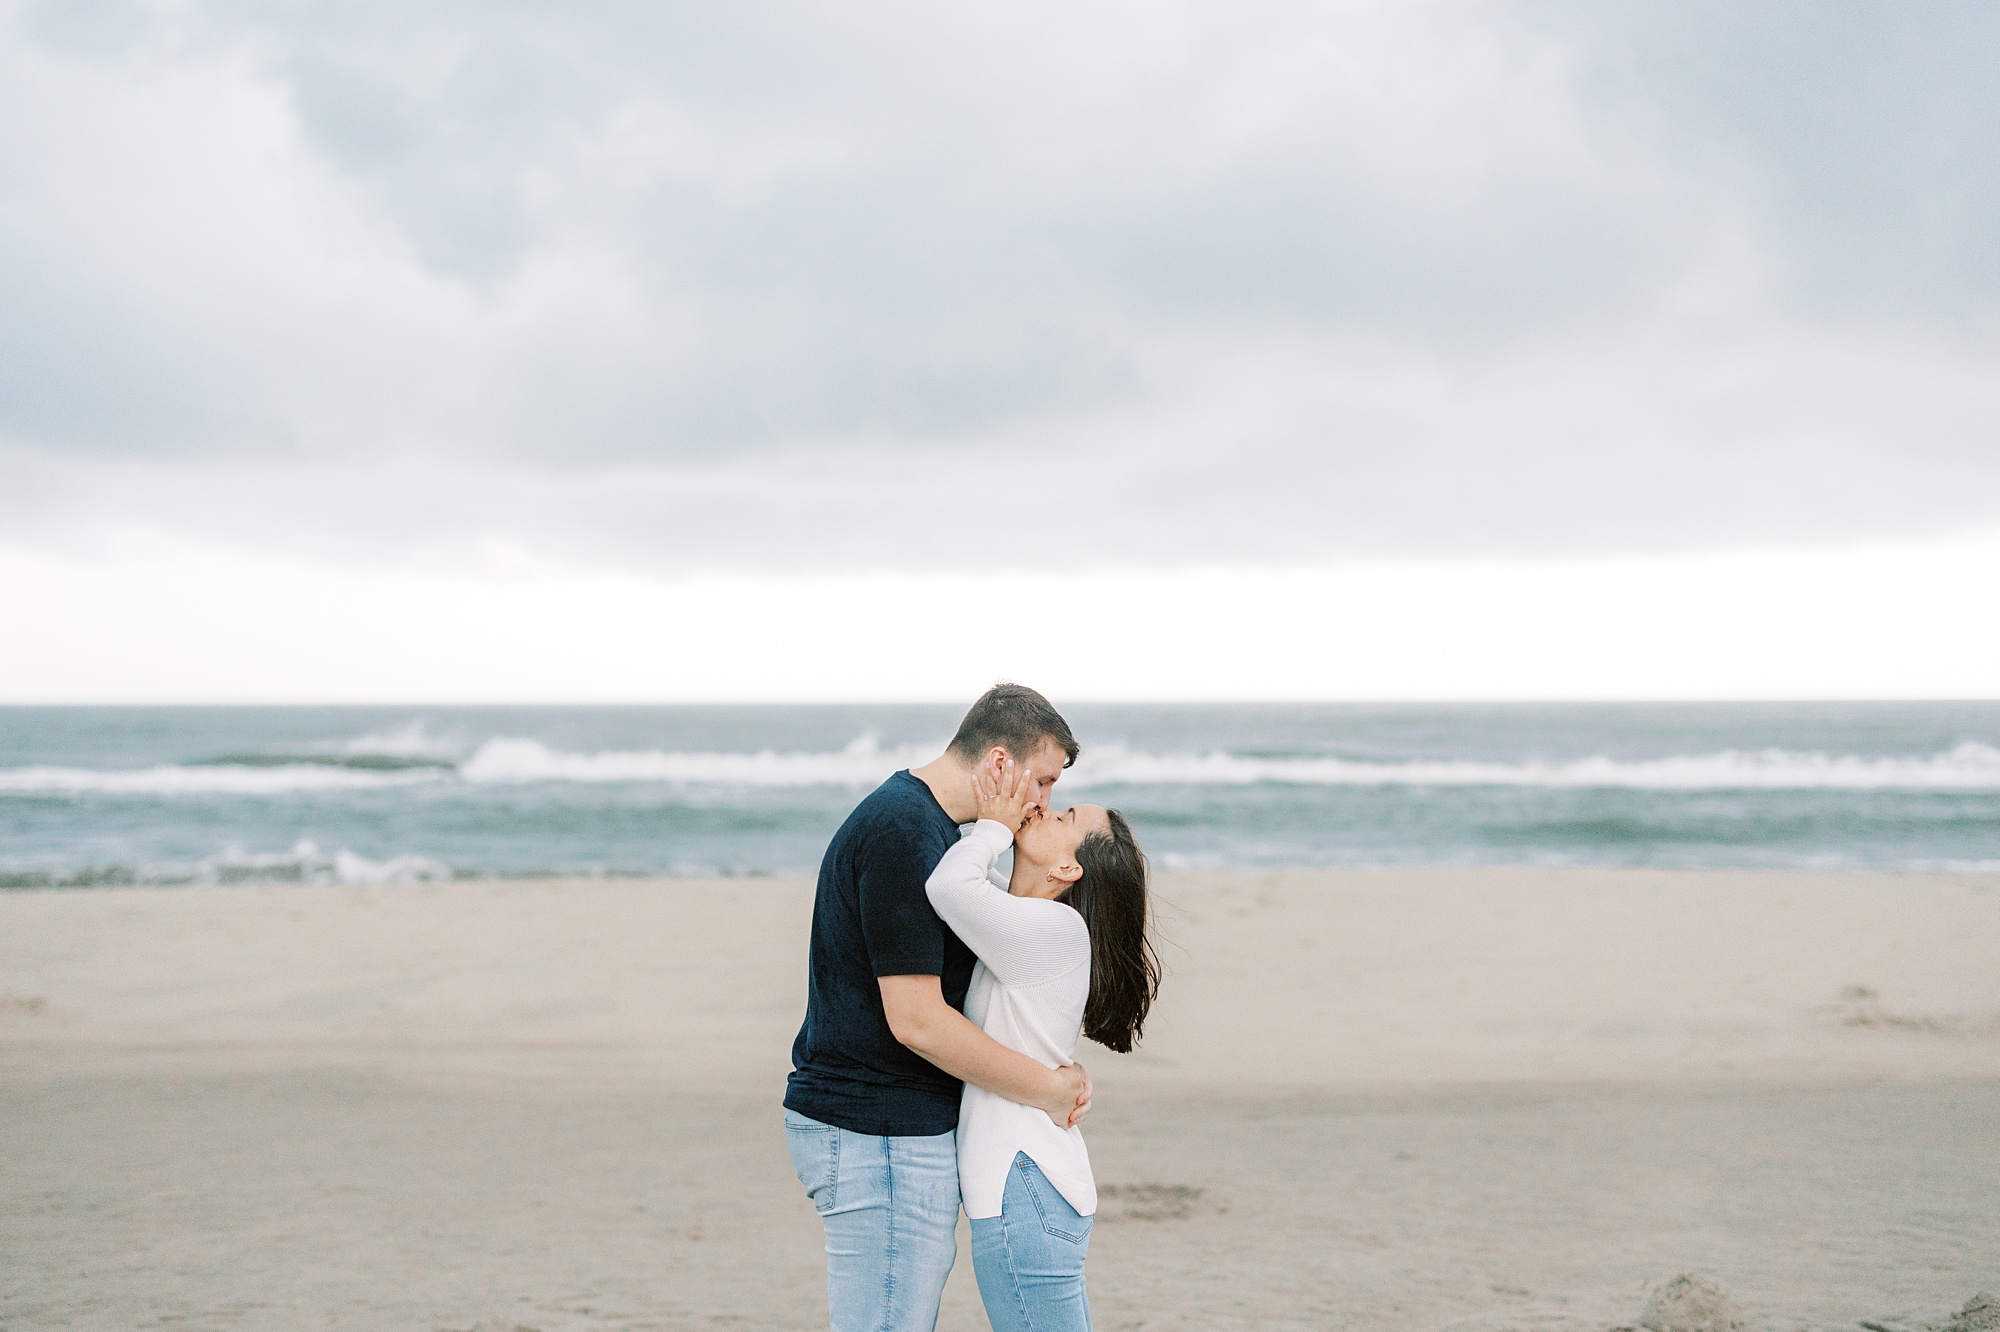 engaged couple kisses in front of water on beach during storm